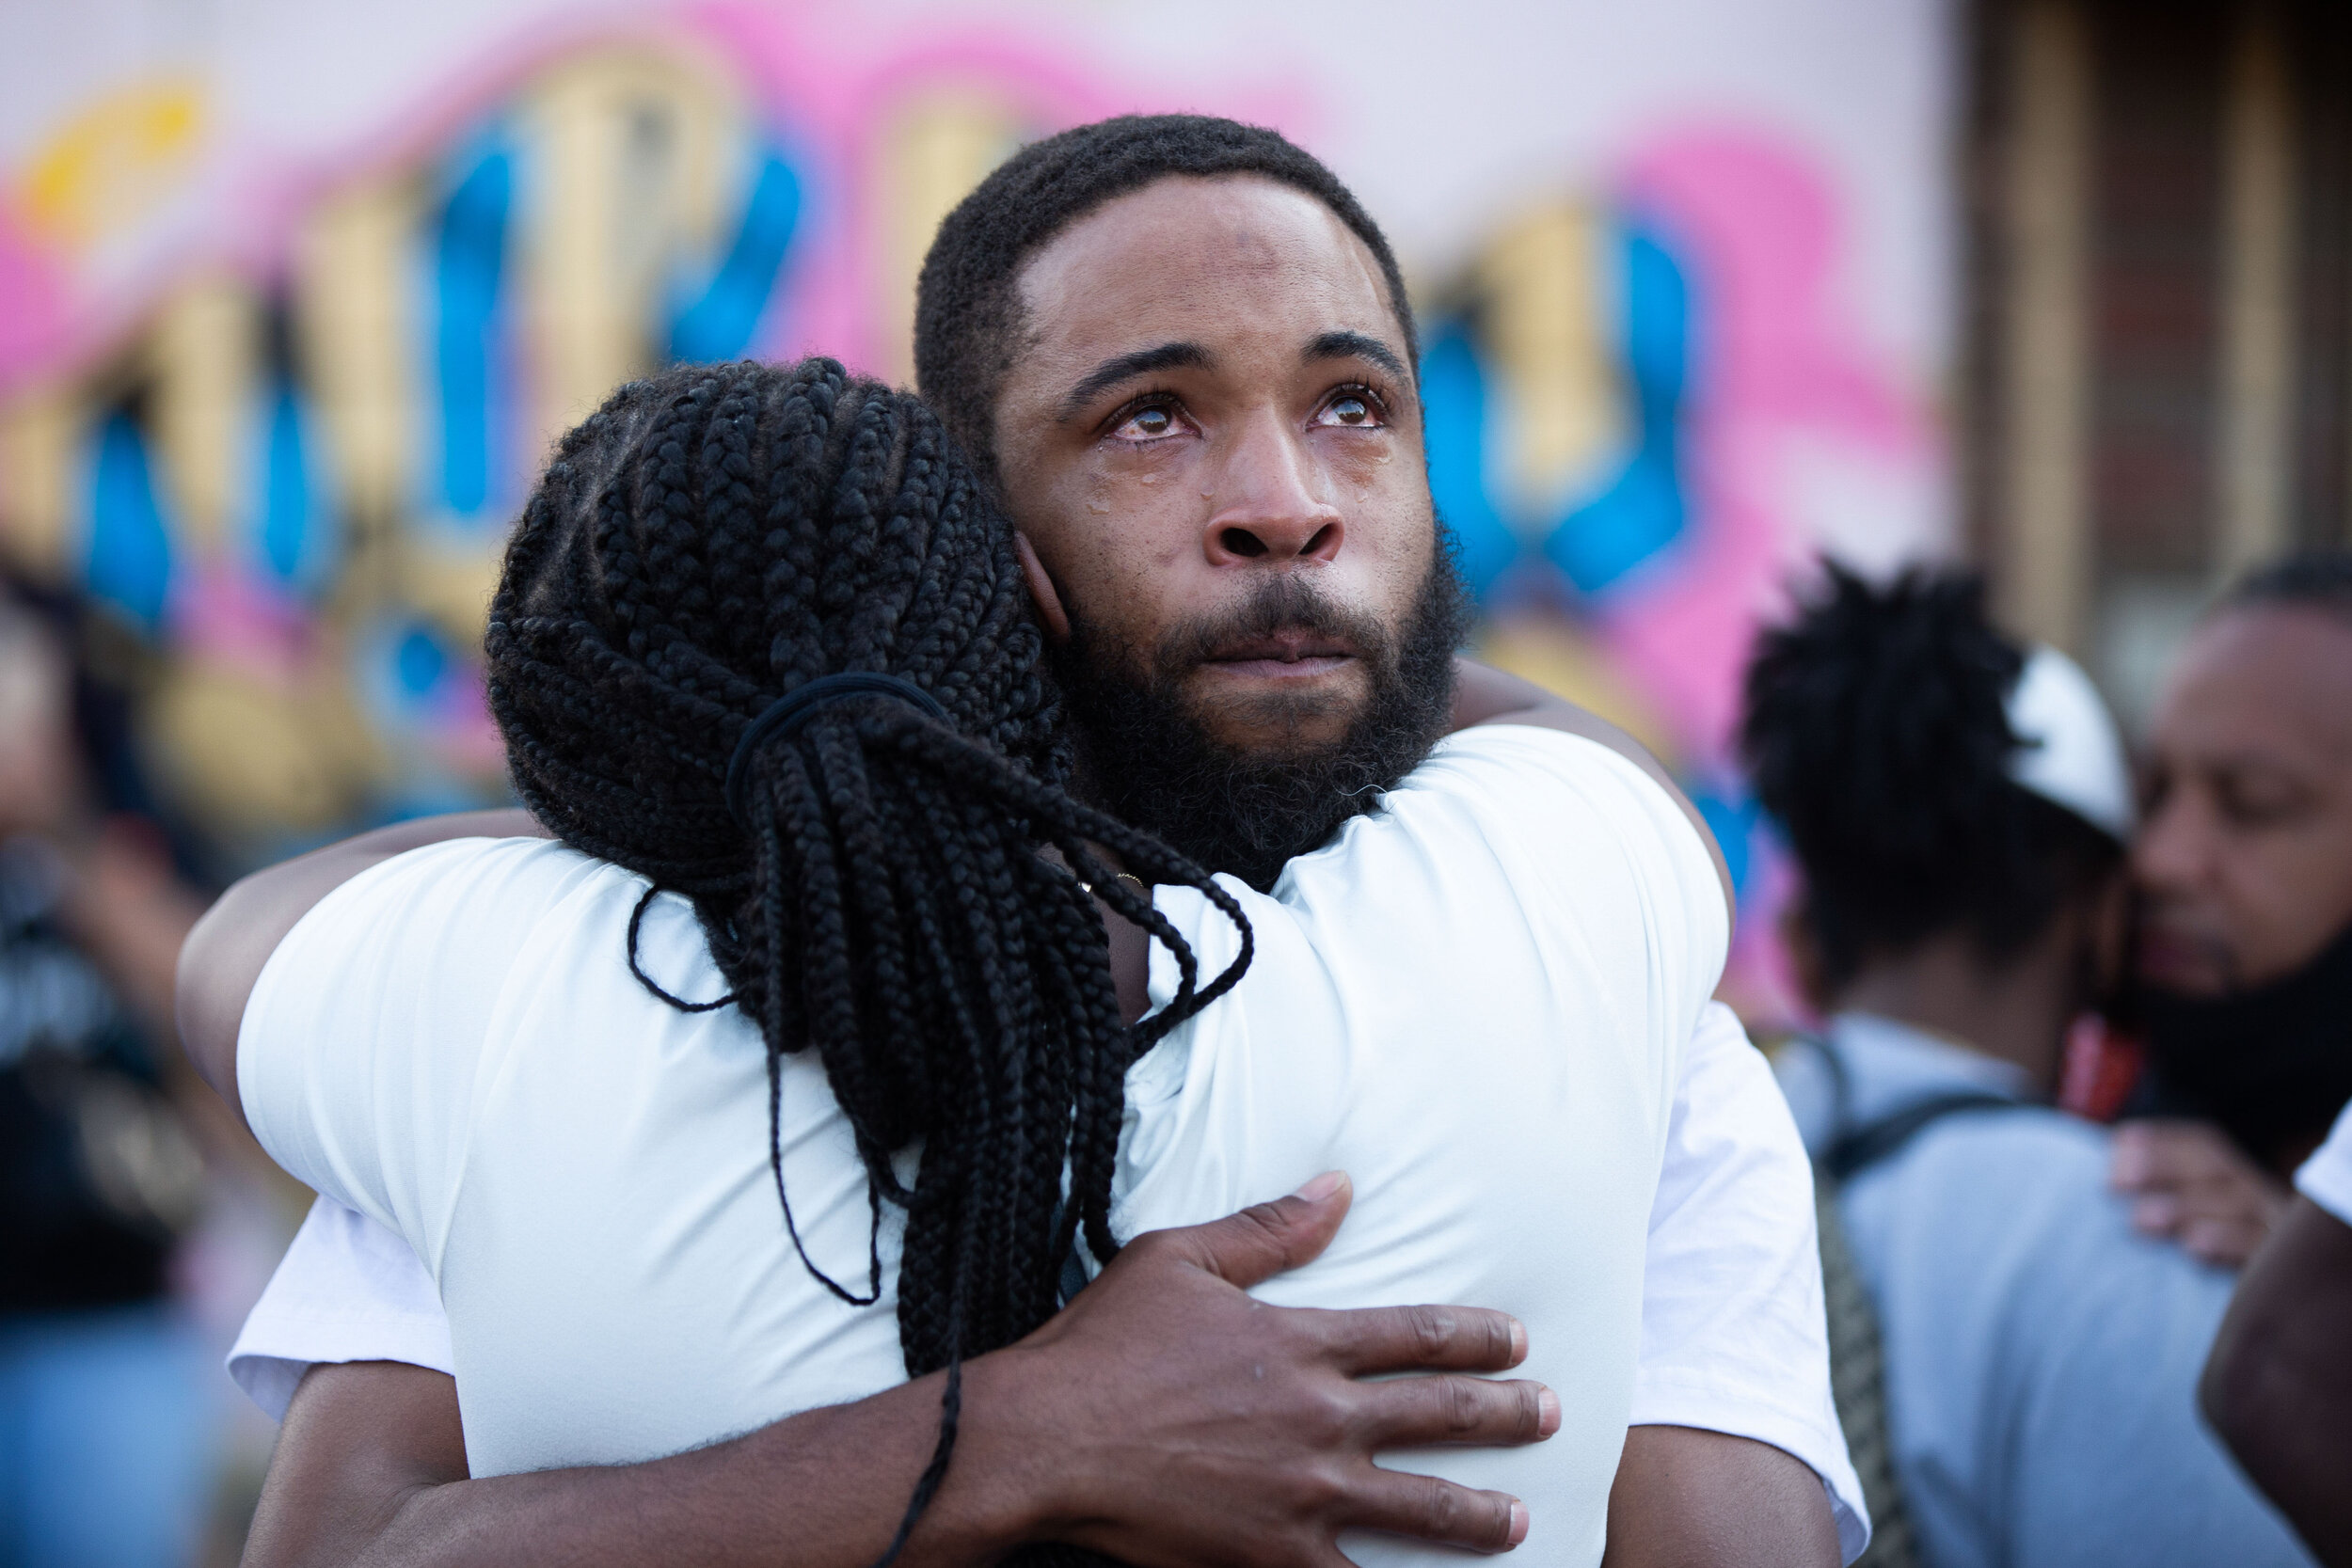  During a prayer session at the memorial site for George Floyd, a man tears up as people around him pray in Minneapolis, Minnesota on Jun 14, 2020. 